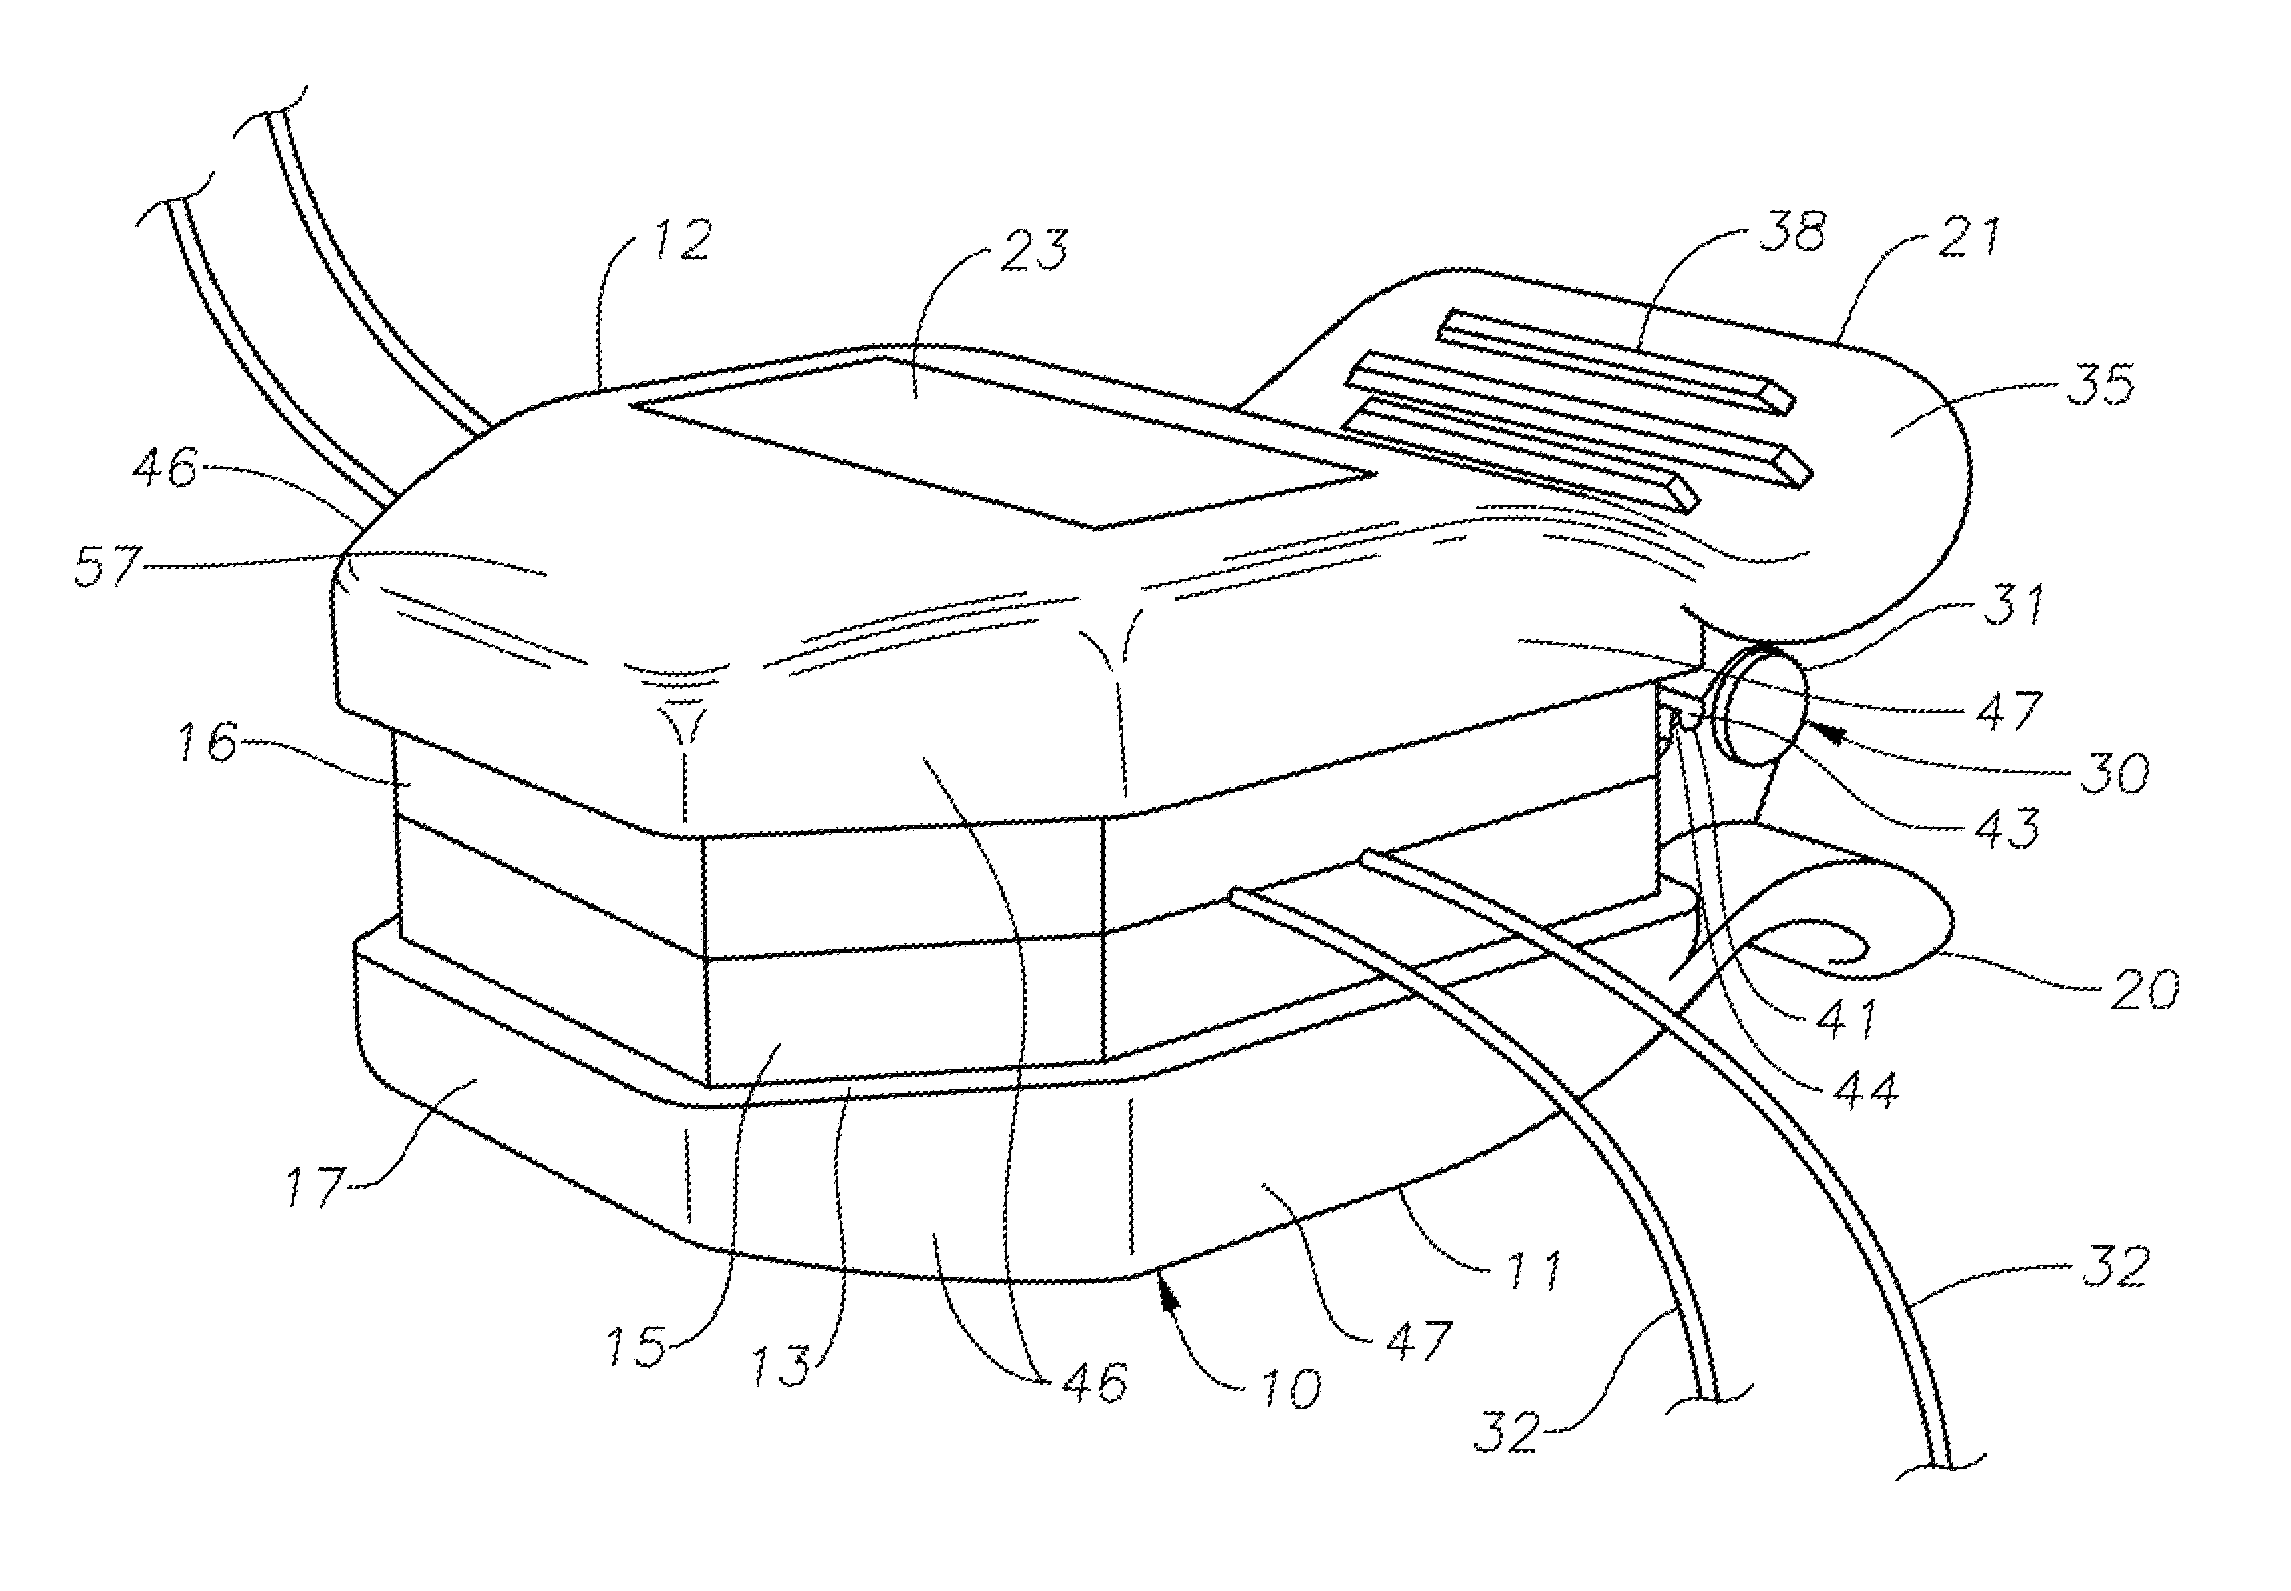 Vascular surgical clamp for holding and guiding guide wire on a sterile field